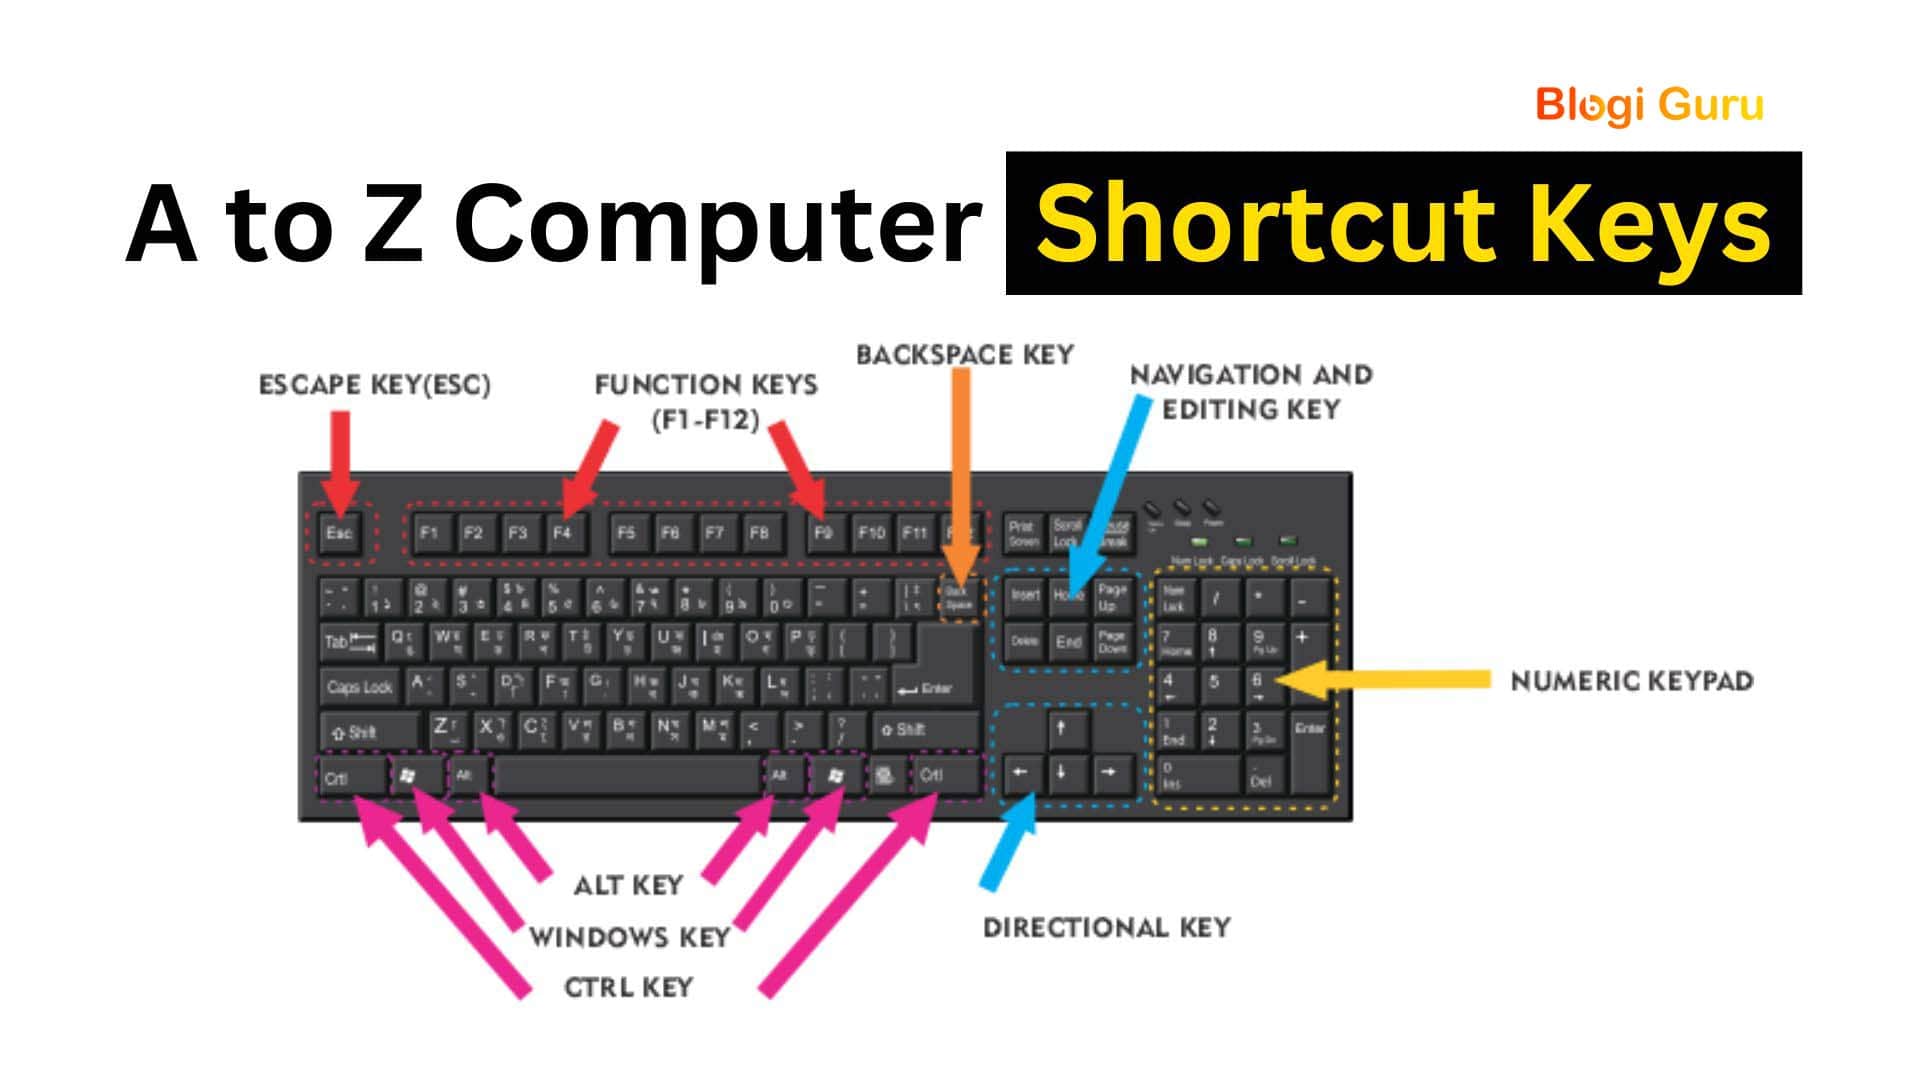 Shortcut Keys of Computer A to Z